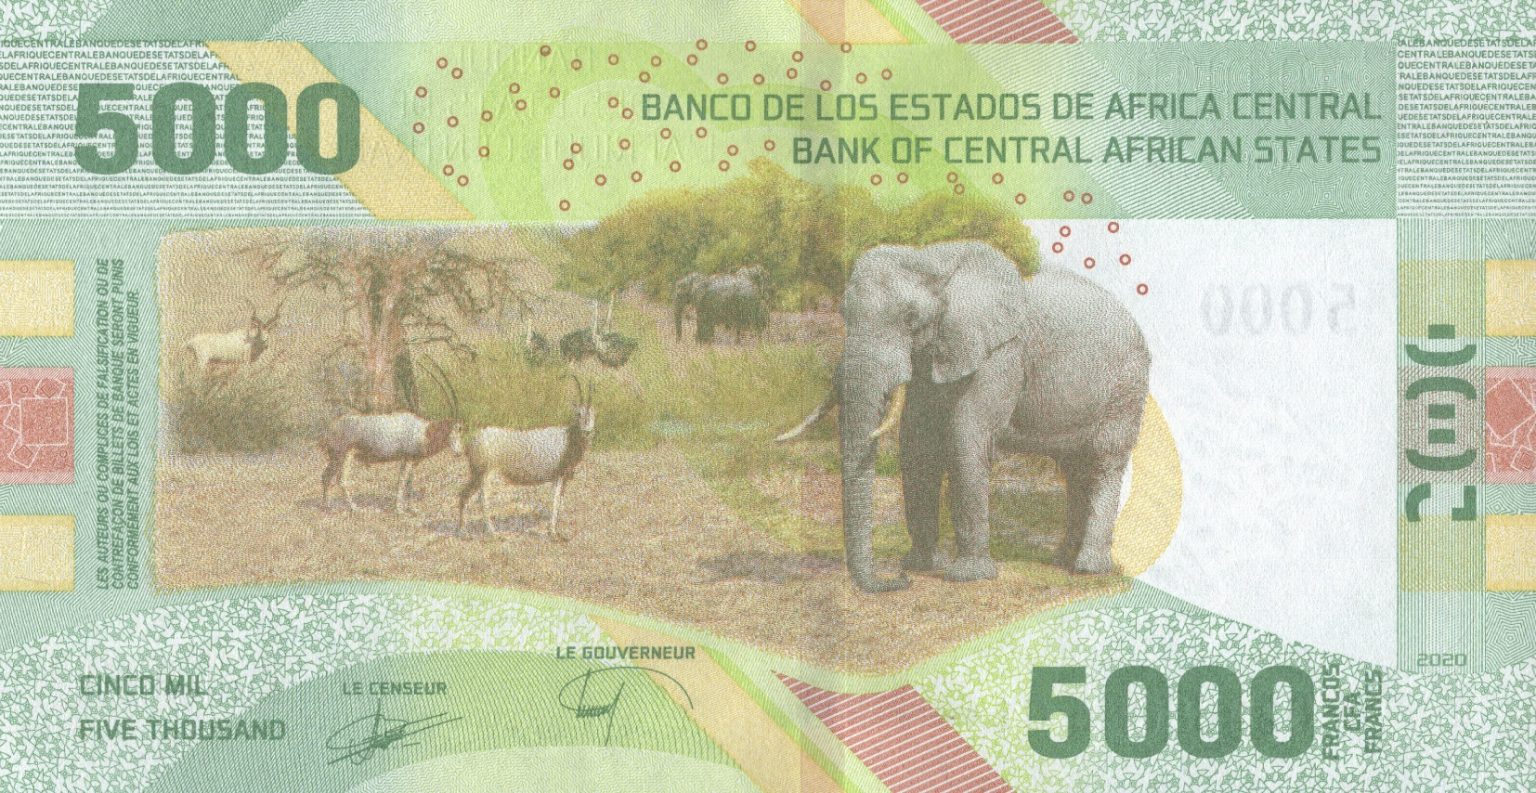 Central African States New 5 000 Franc Note B114 Confirmed Banknotenews